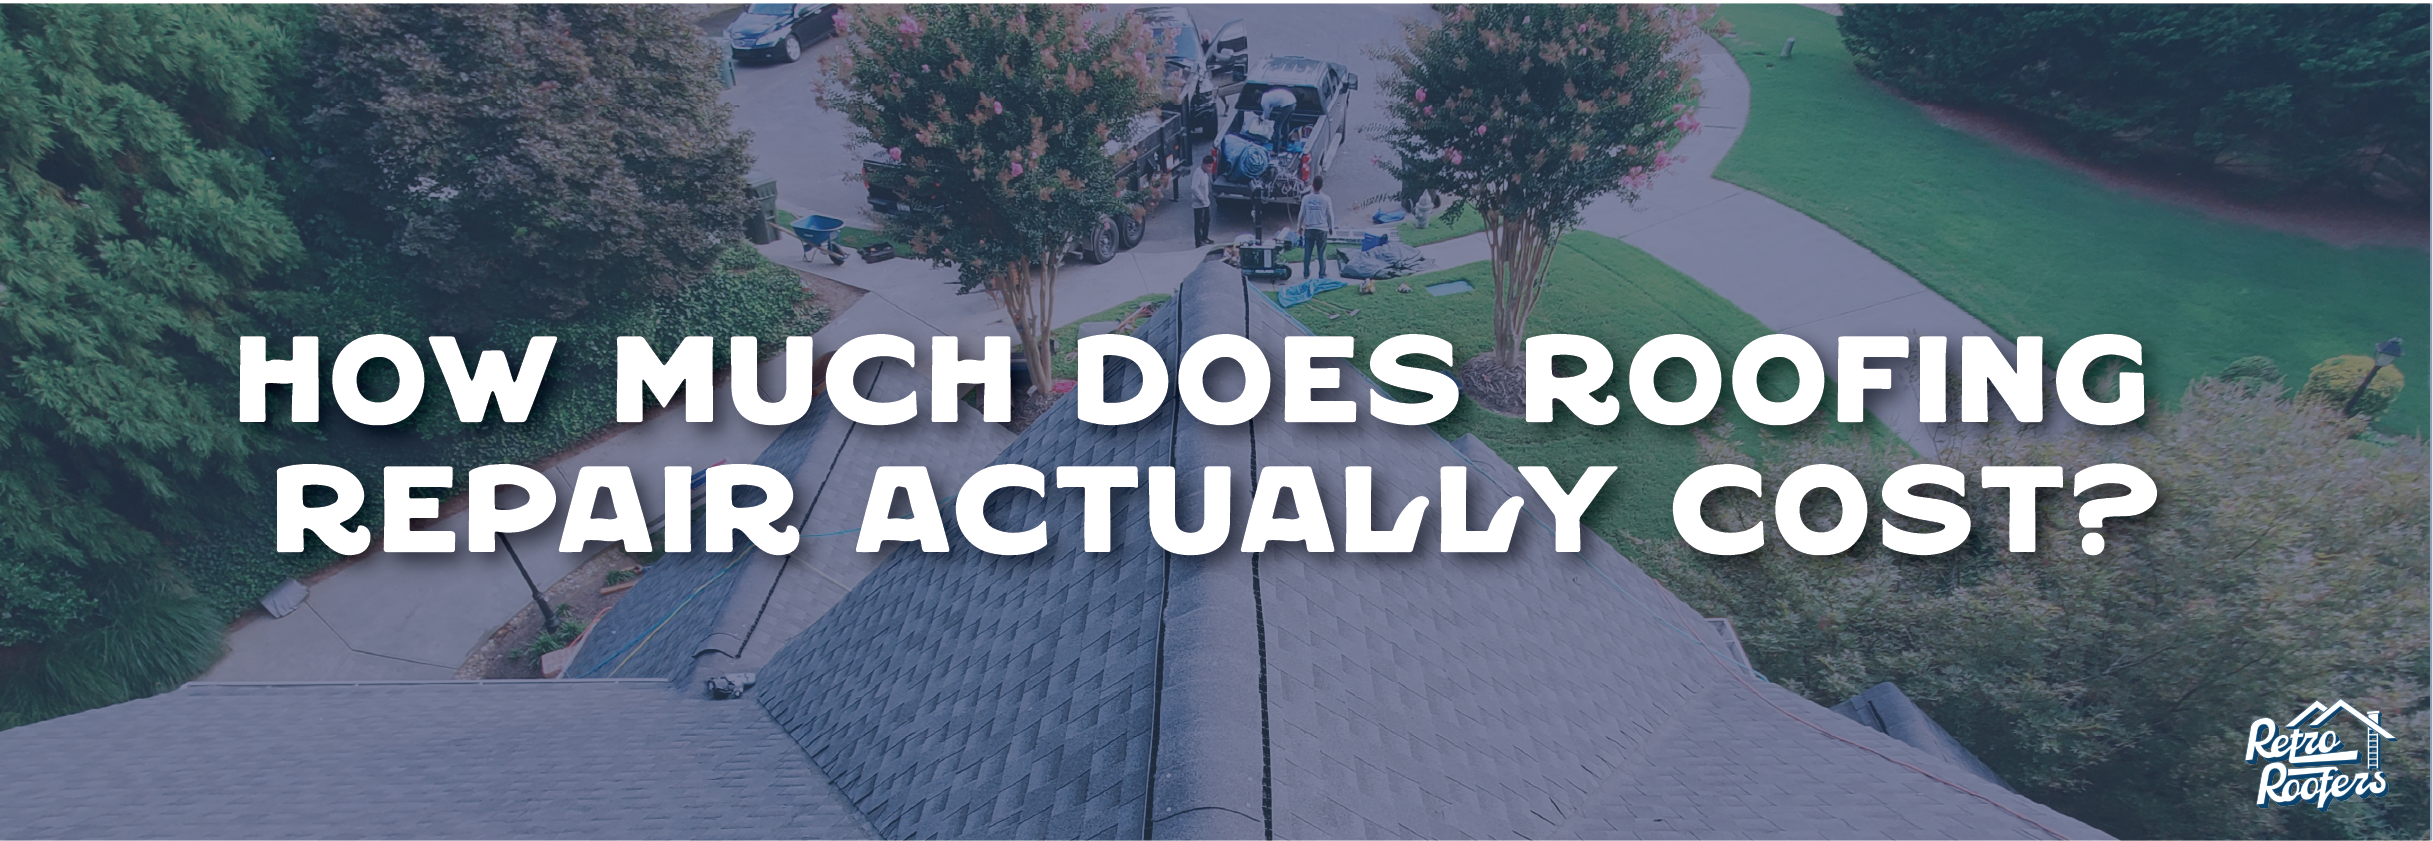 how-much-does-roofing-repair-actually-cost